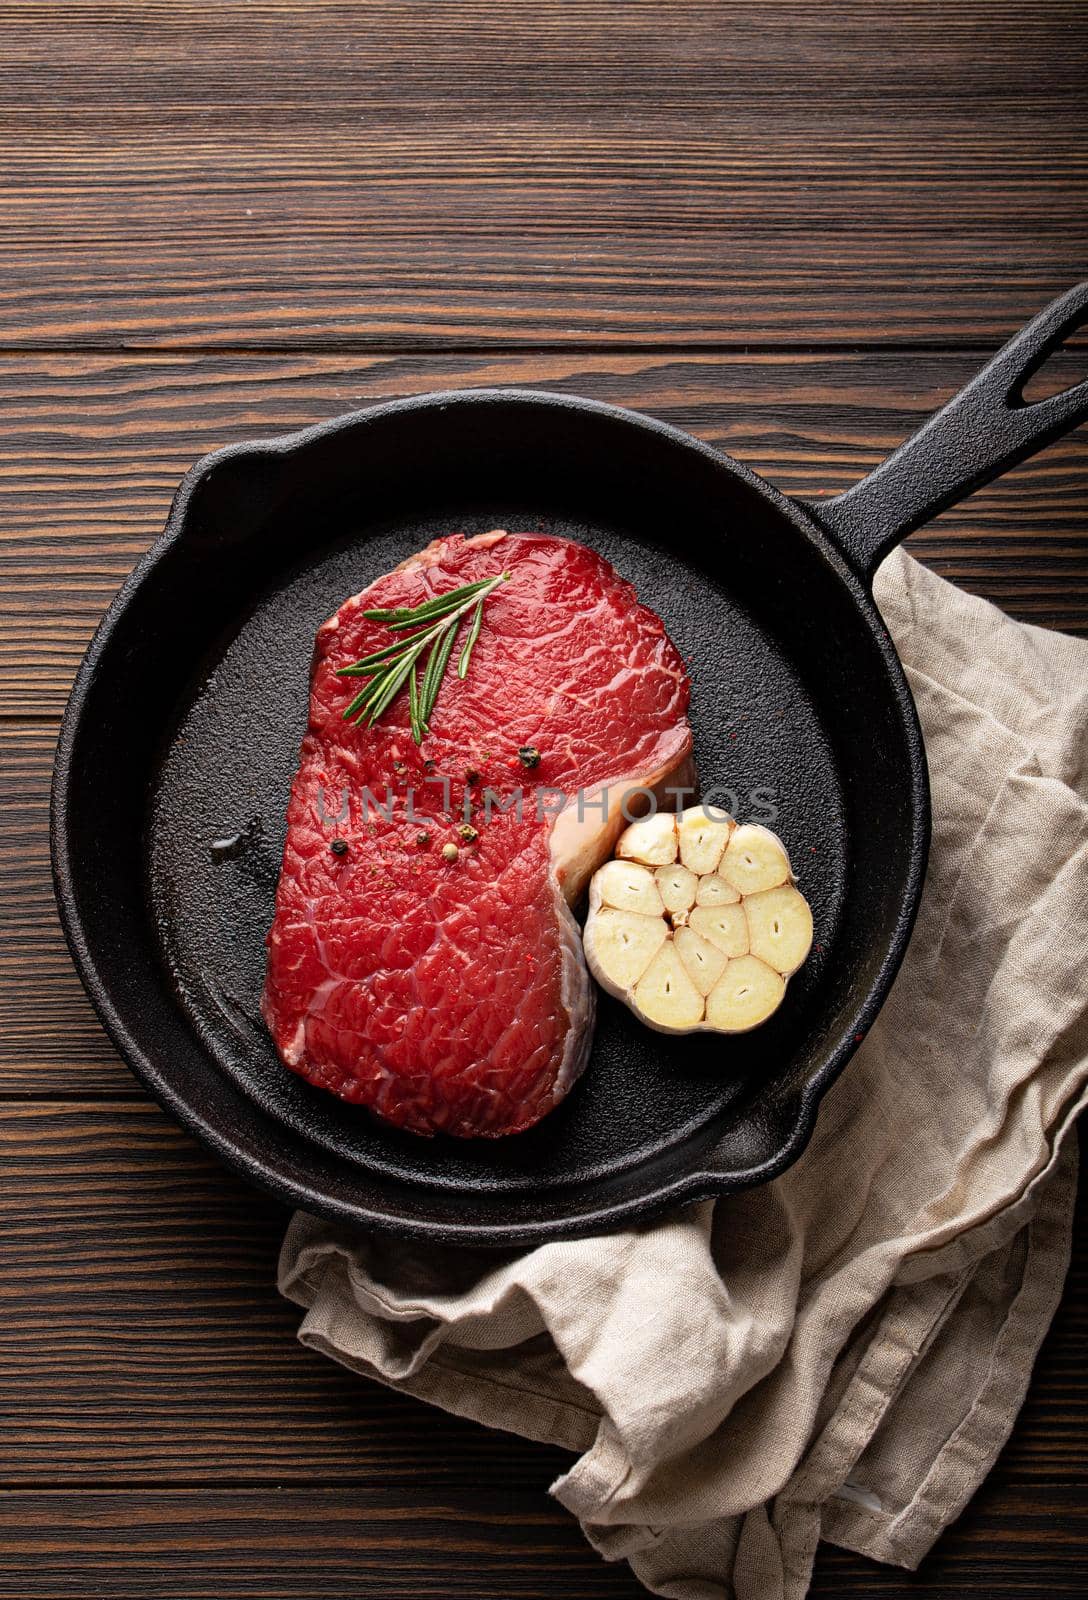 Raw fresh beef steak with seasonings, garlic and rosemary on cast iron frying pan on dark wooden background from above with textile napkin